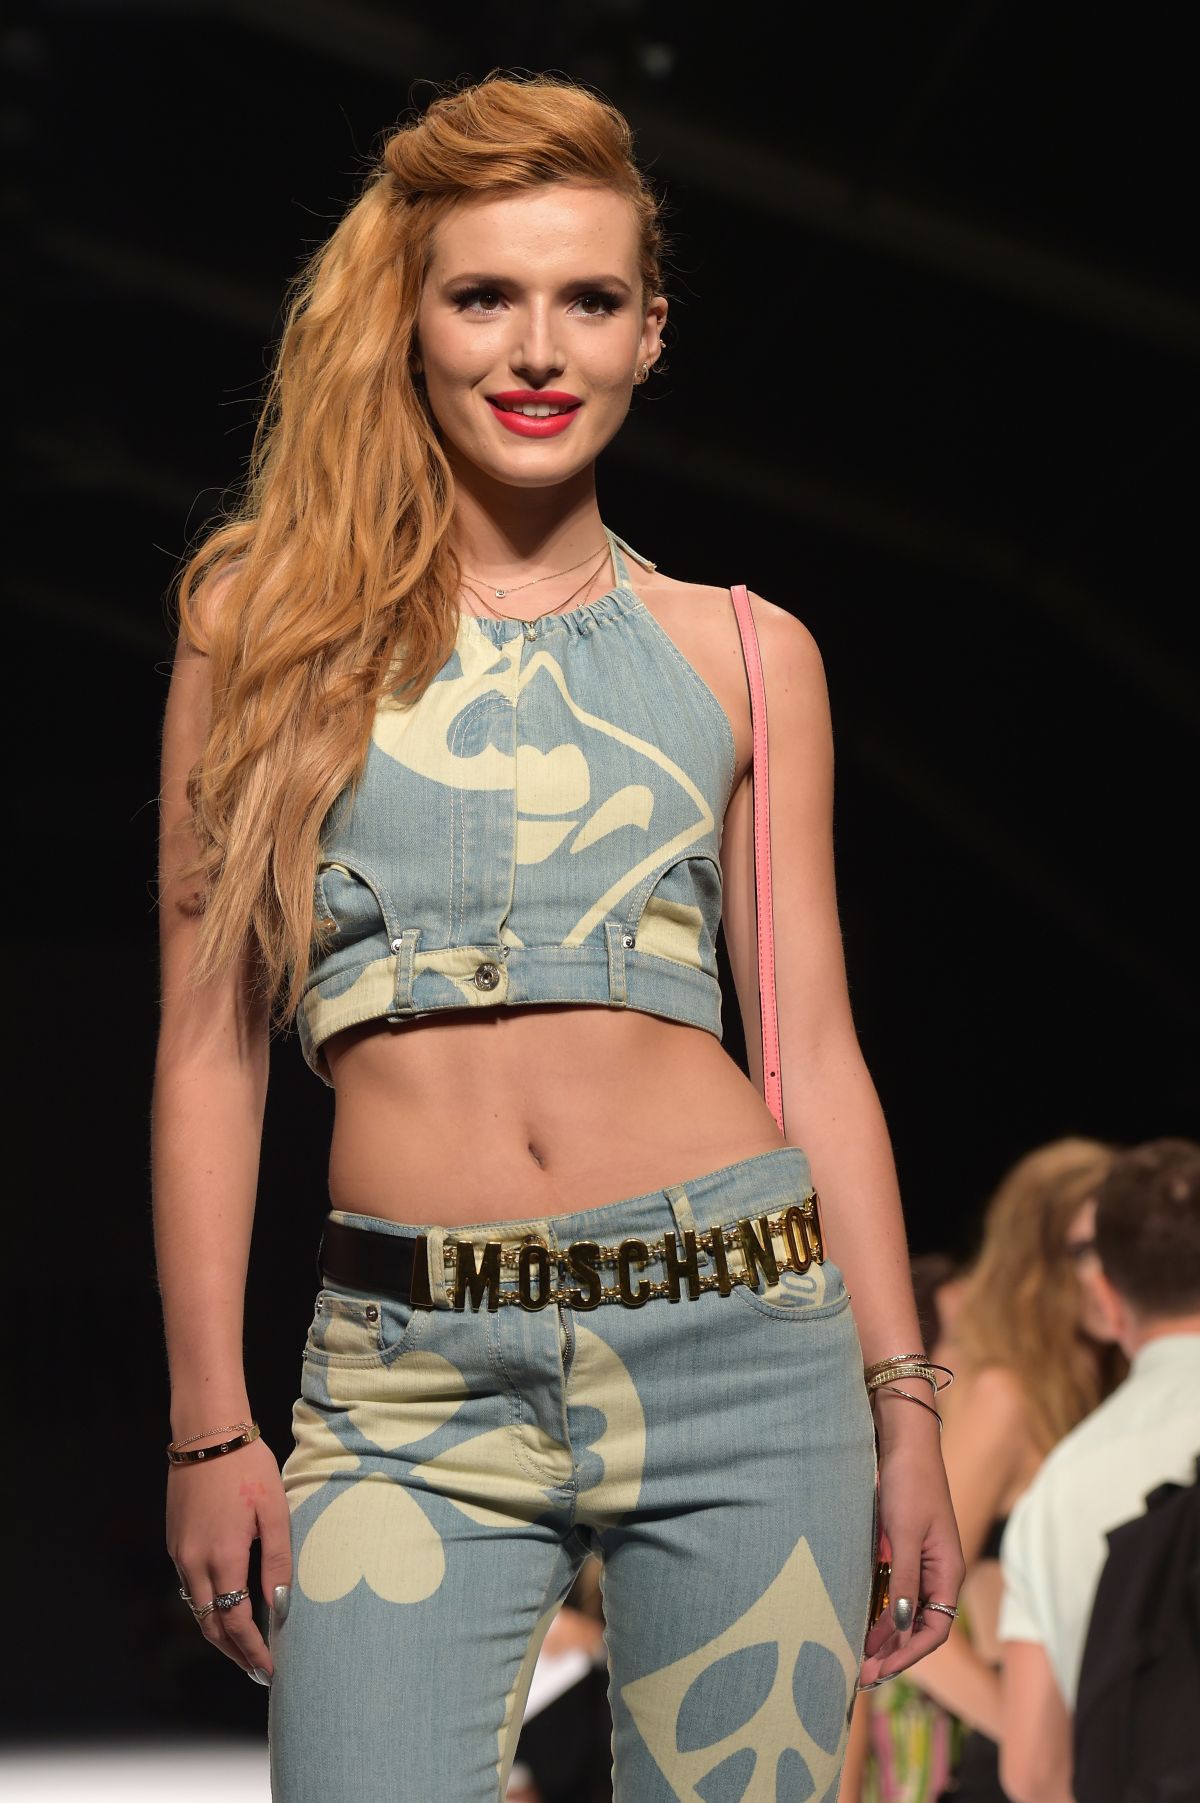 BELLA THORNE at Runway of Moschino Fashion Show in Milan – HawtCelebs